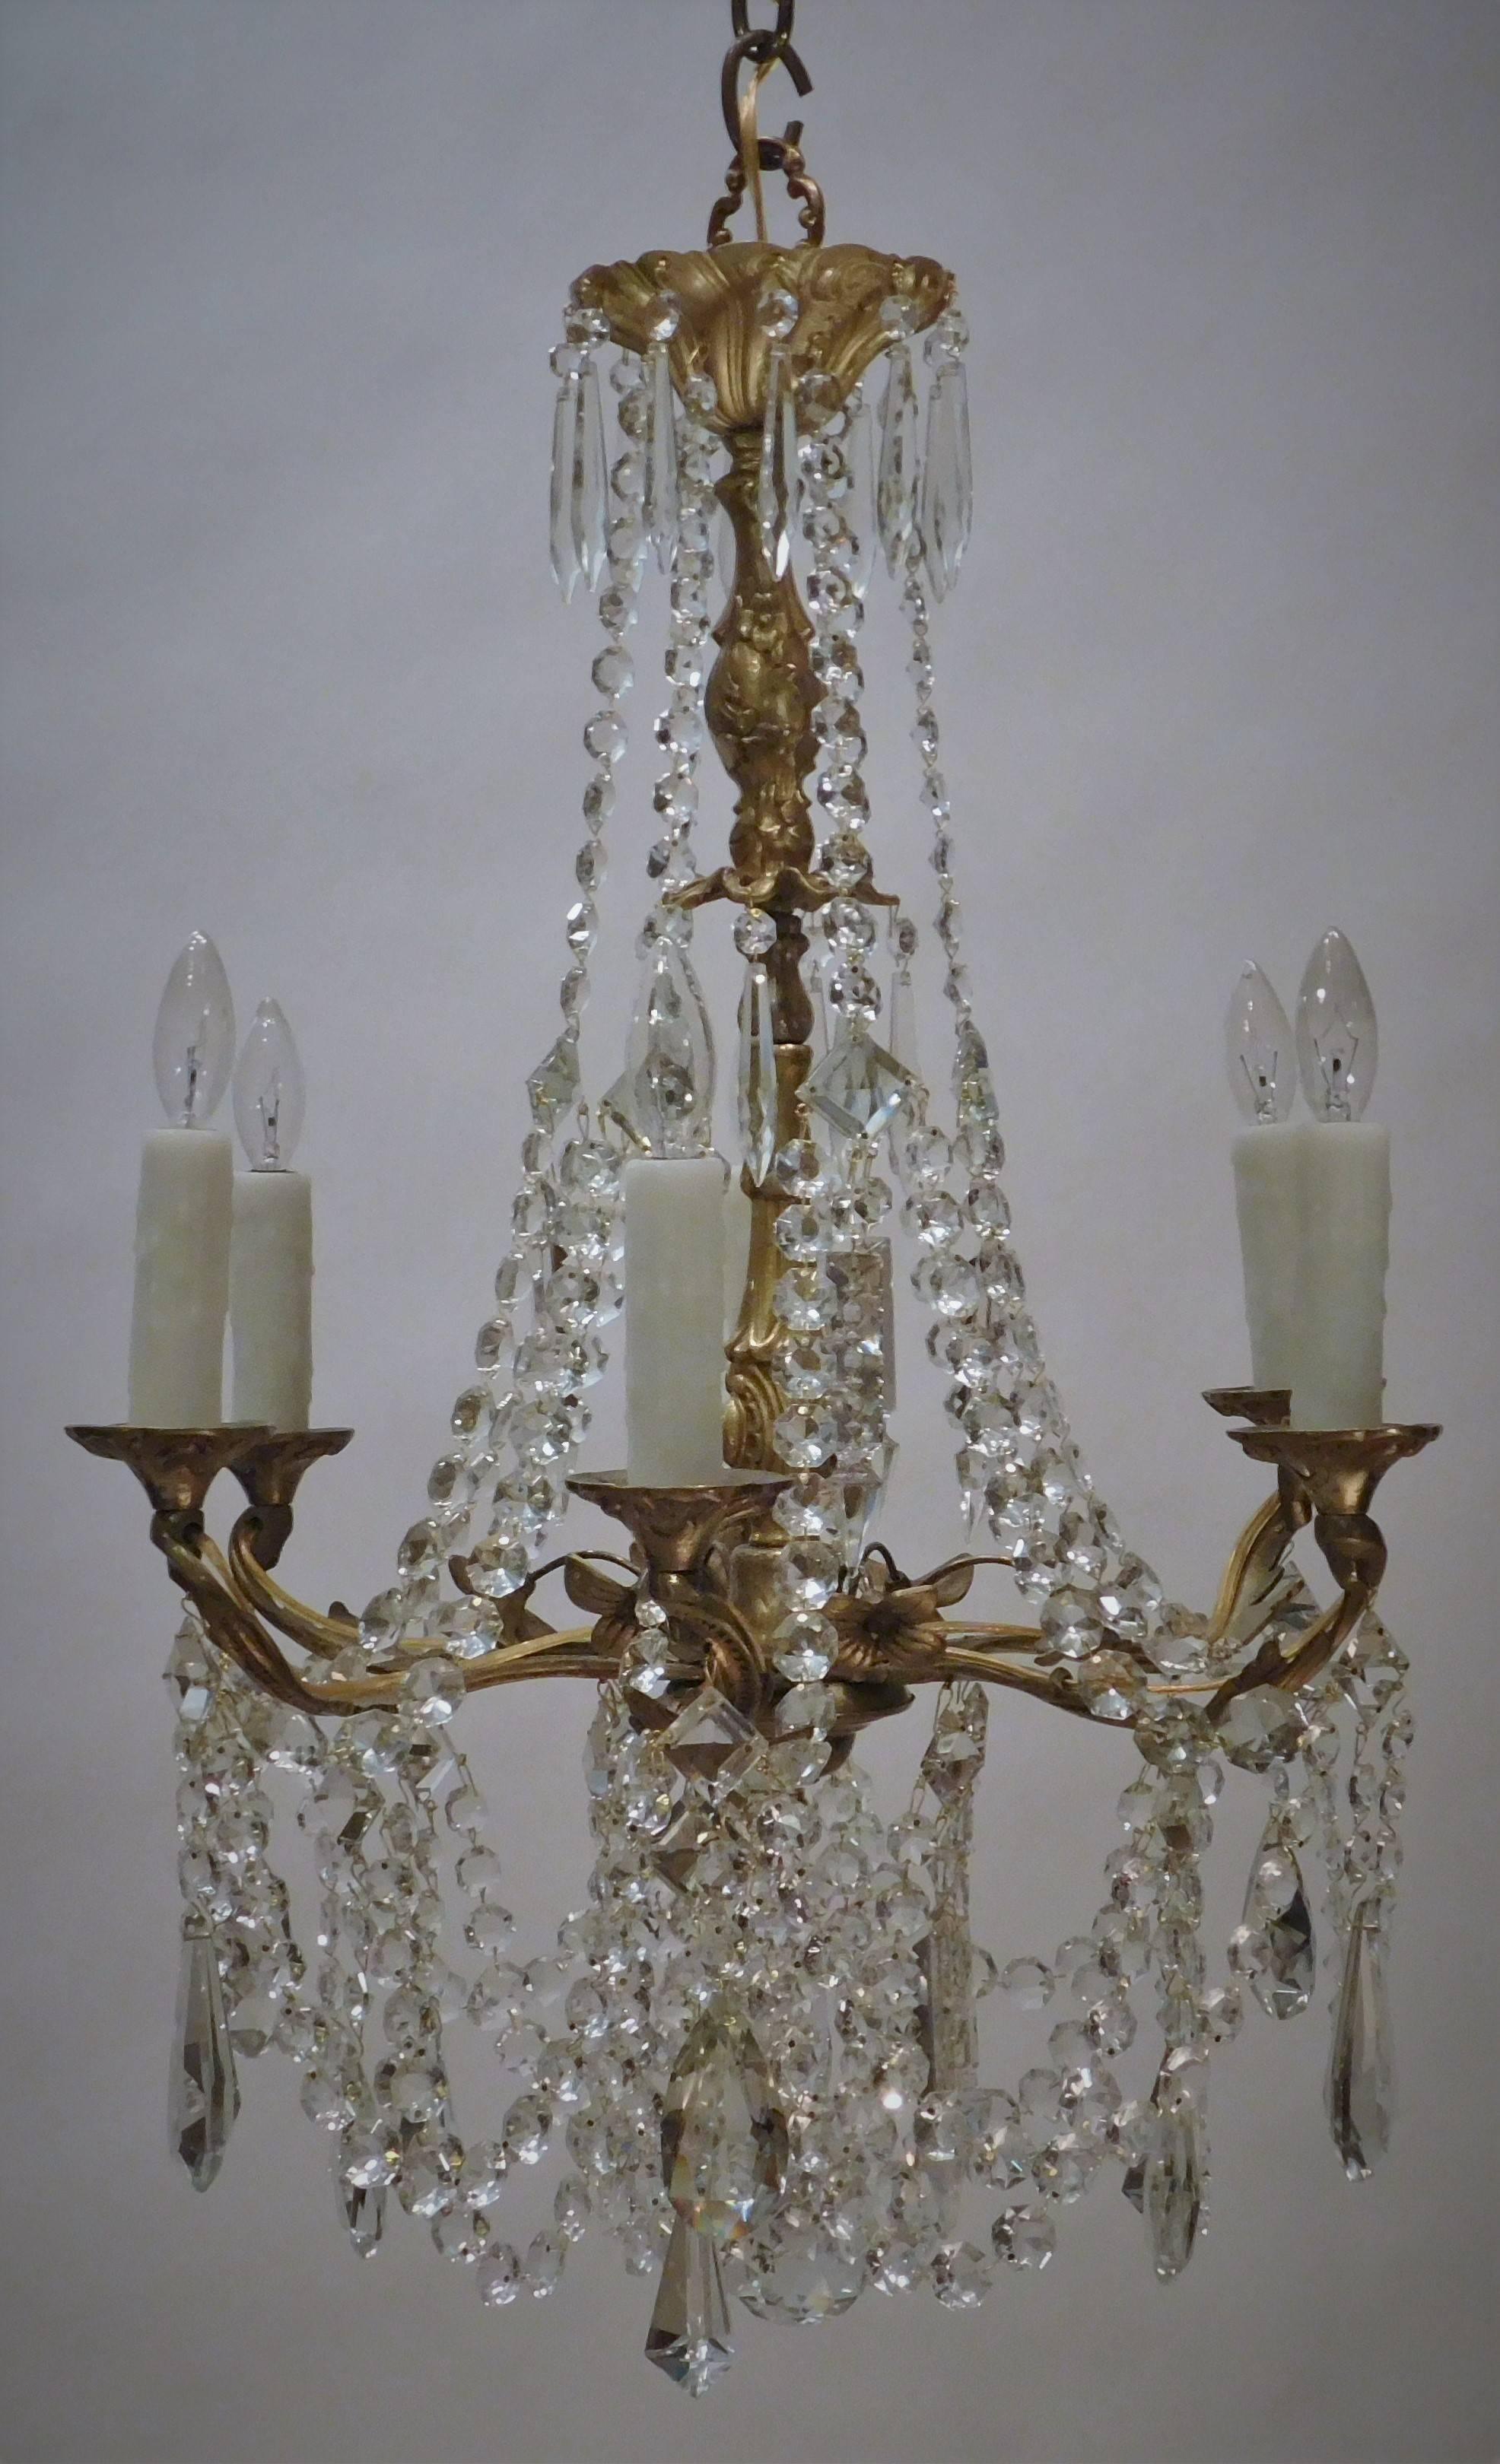 This rococo style chandelier is made of hand-cast gilt brass with hand-cut lead crystal Swedish prisms. It is externally (or French) wired. Ceiling cap, hanging hardware and one foot of chain included.